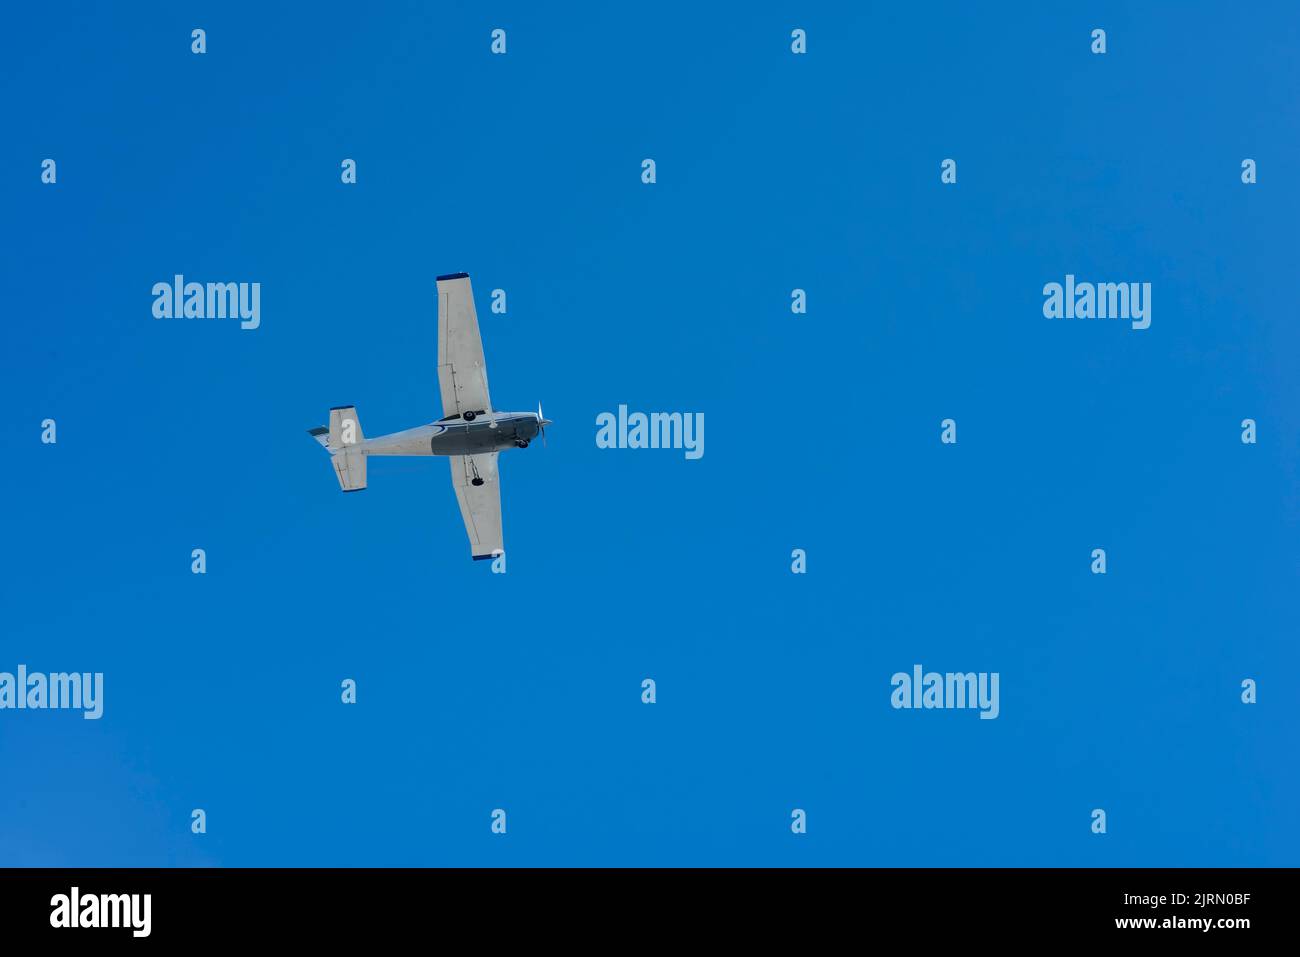 A small single-engine plane flying against the blue sky. on blue, Playa del Carmen, Mexico Stock Photo